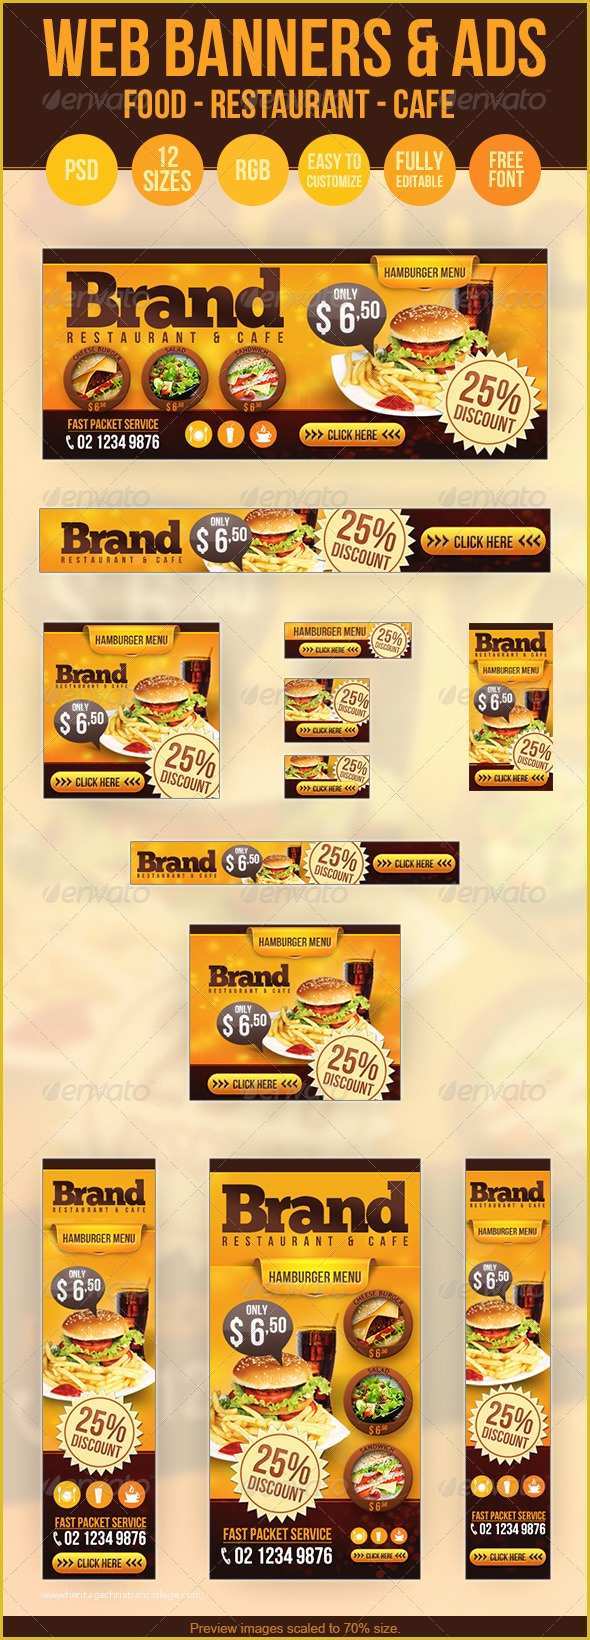 Food Banner Design Template Free Of Food Web Banners & Advertise Psd Templates by Hsynkyc